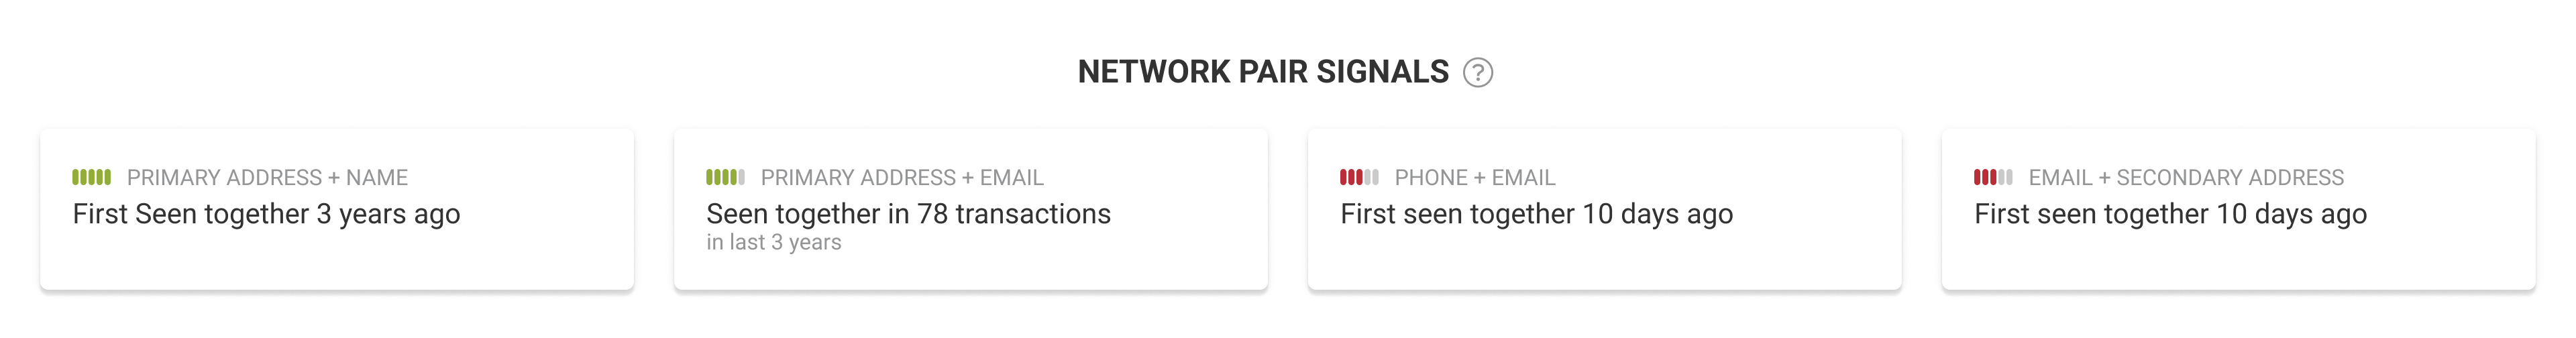 Network_Pair_Signal_Panel.png